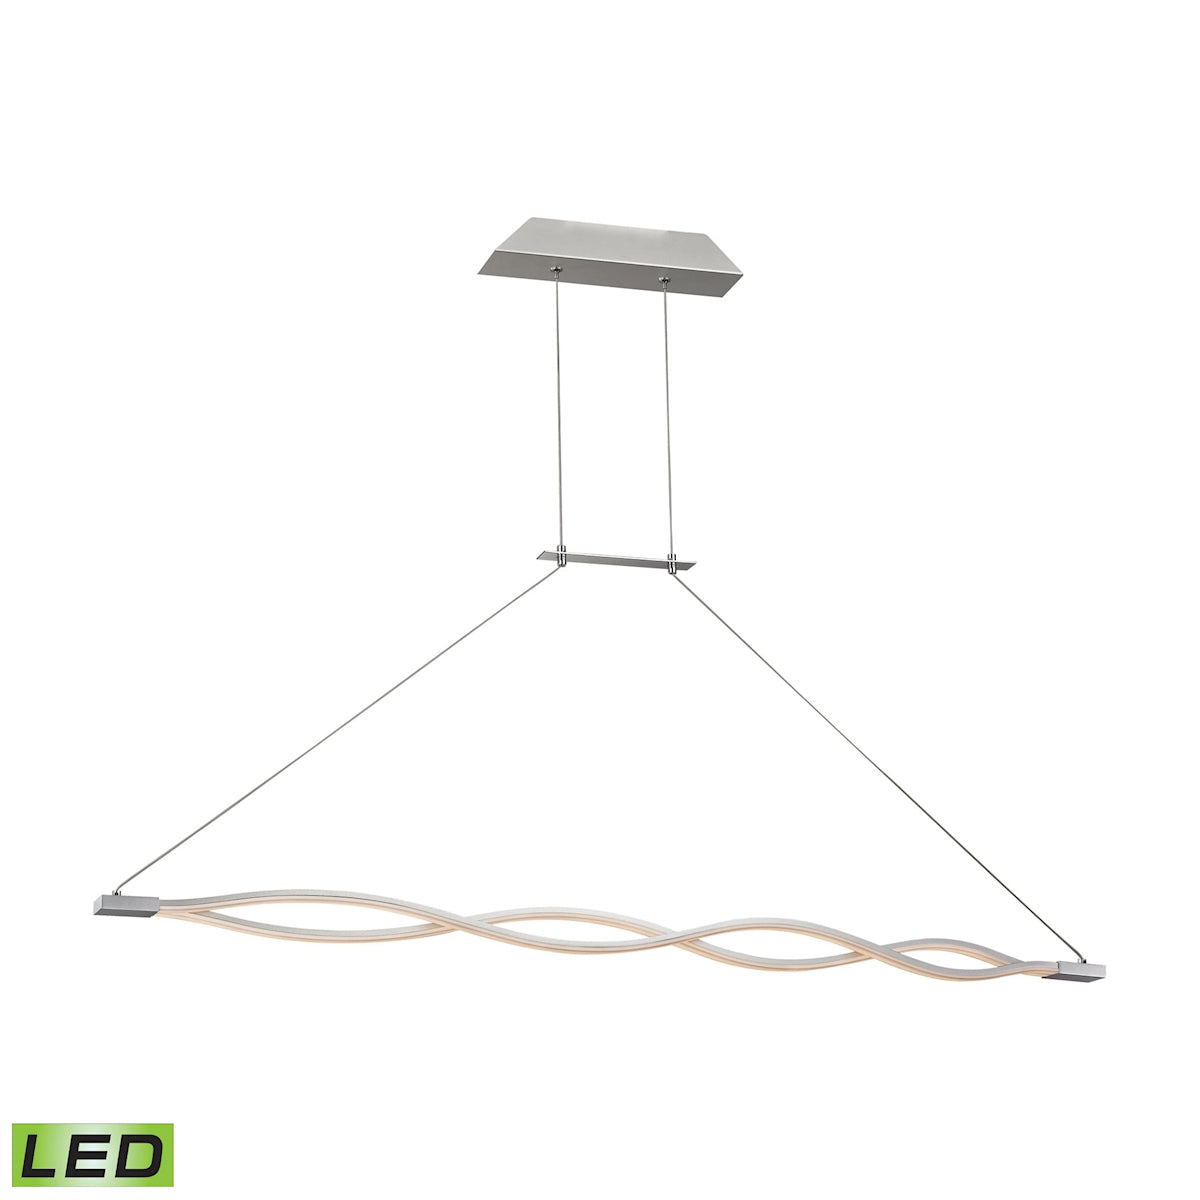 ELK Lighting LC1350-10-98 Twist 2-Light Island Light in Aluminum with Opal Glass Diffuser - Integrated LED